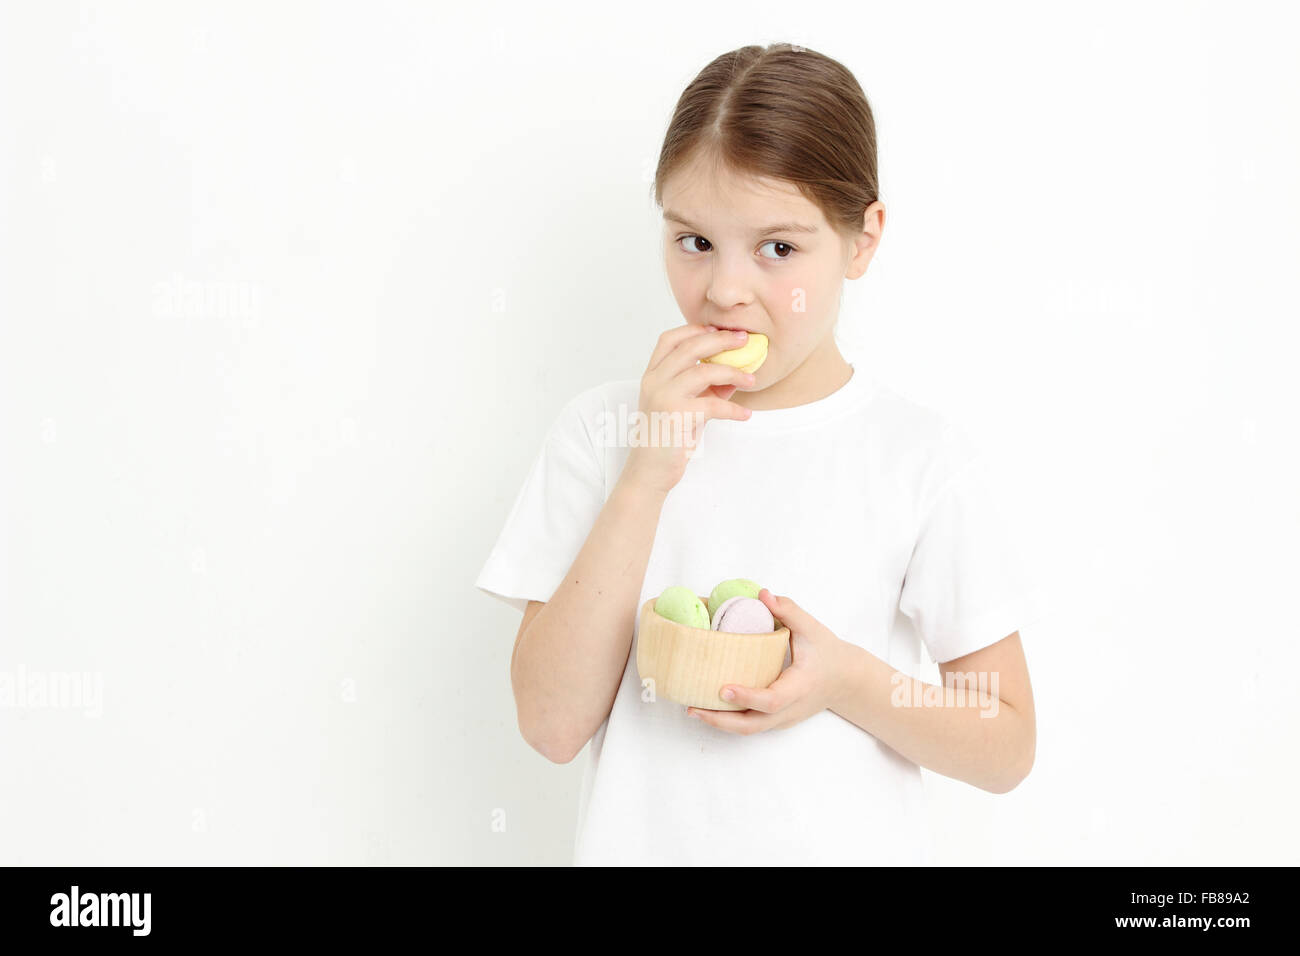 Kid with french food Stock Photo